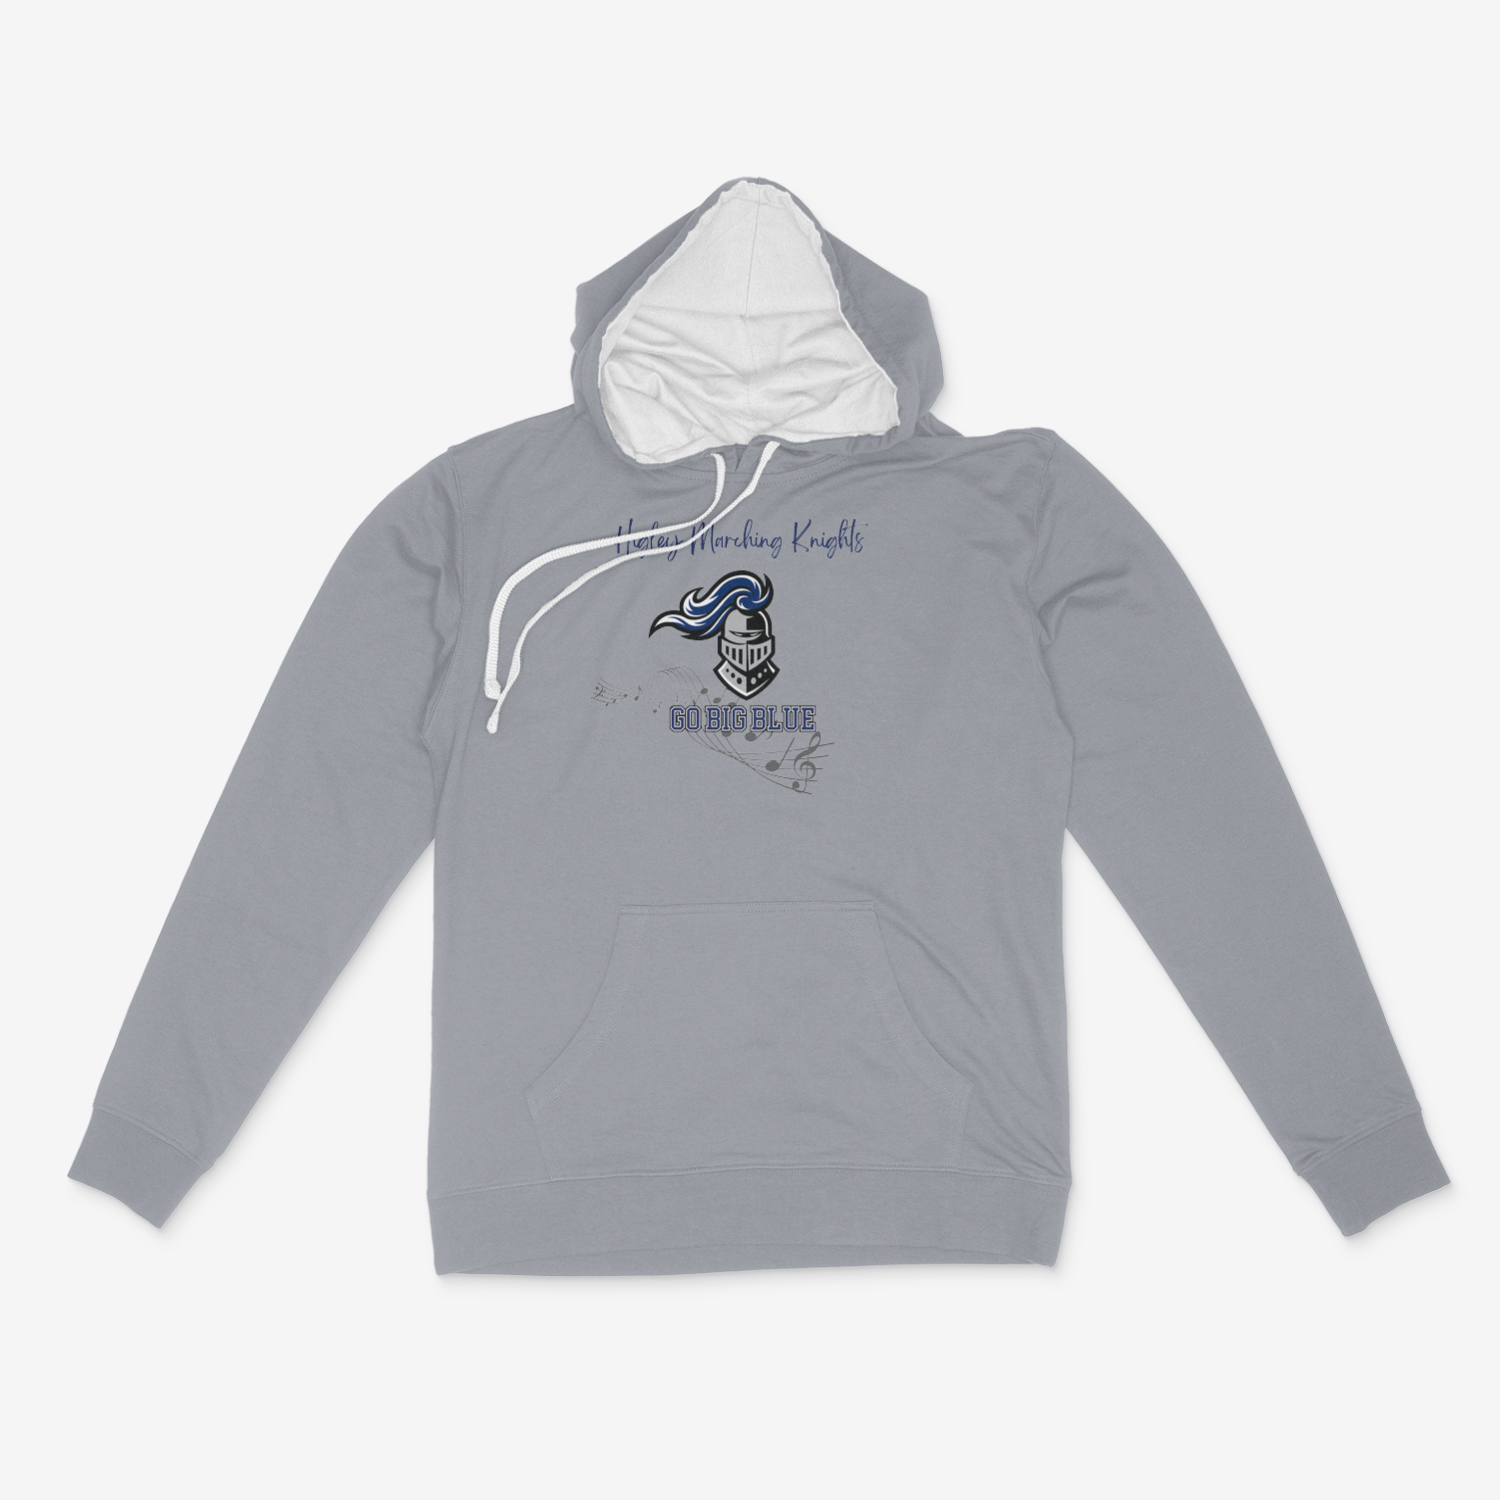 Higley Marching Knights Pullover Hoodie - Student